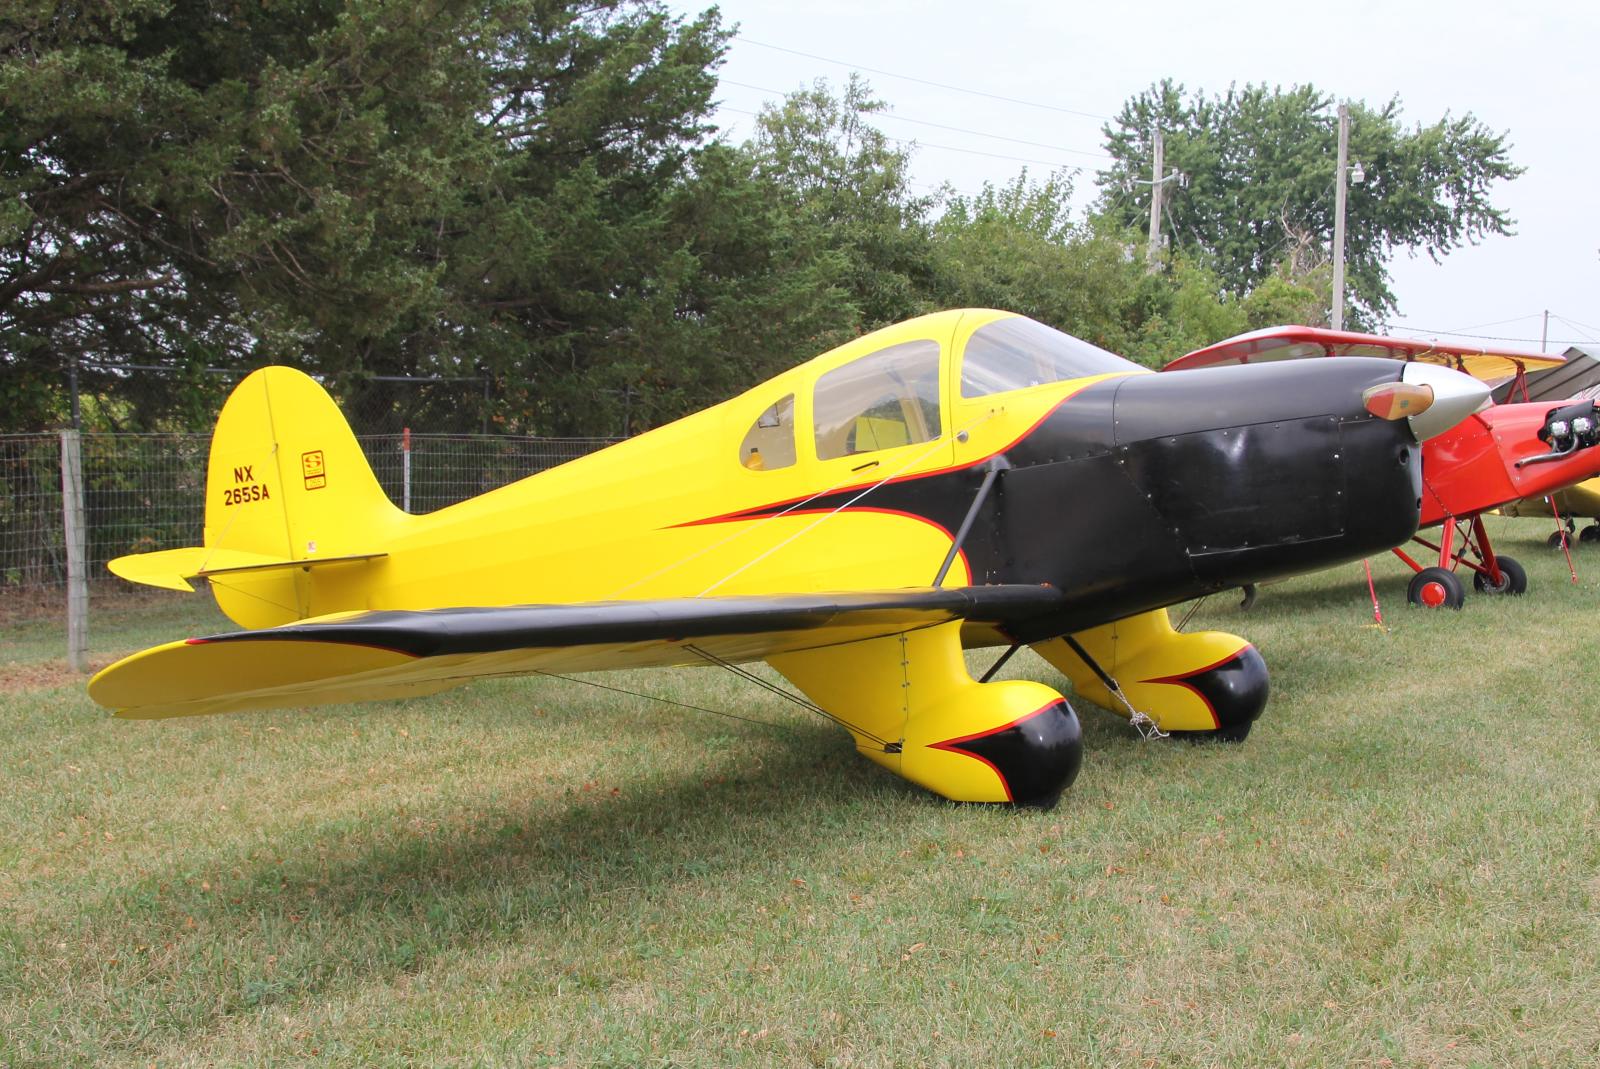 a small yellow plane sitting in the grass next to a red and black airplane